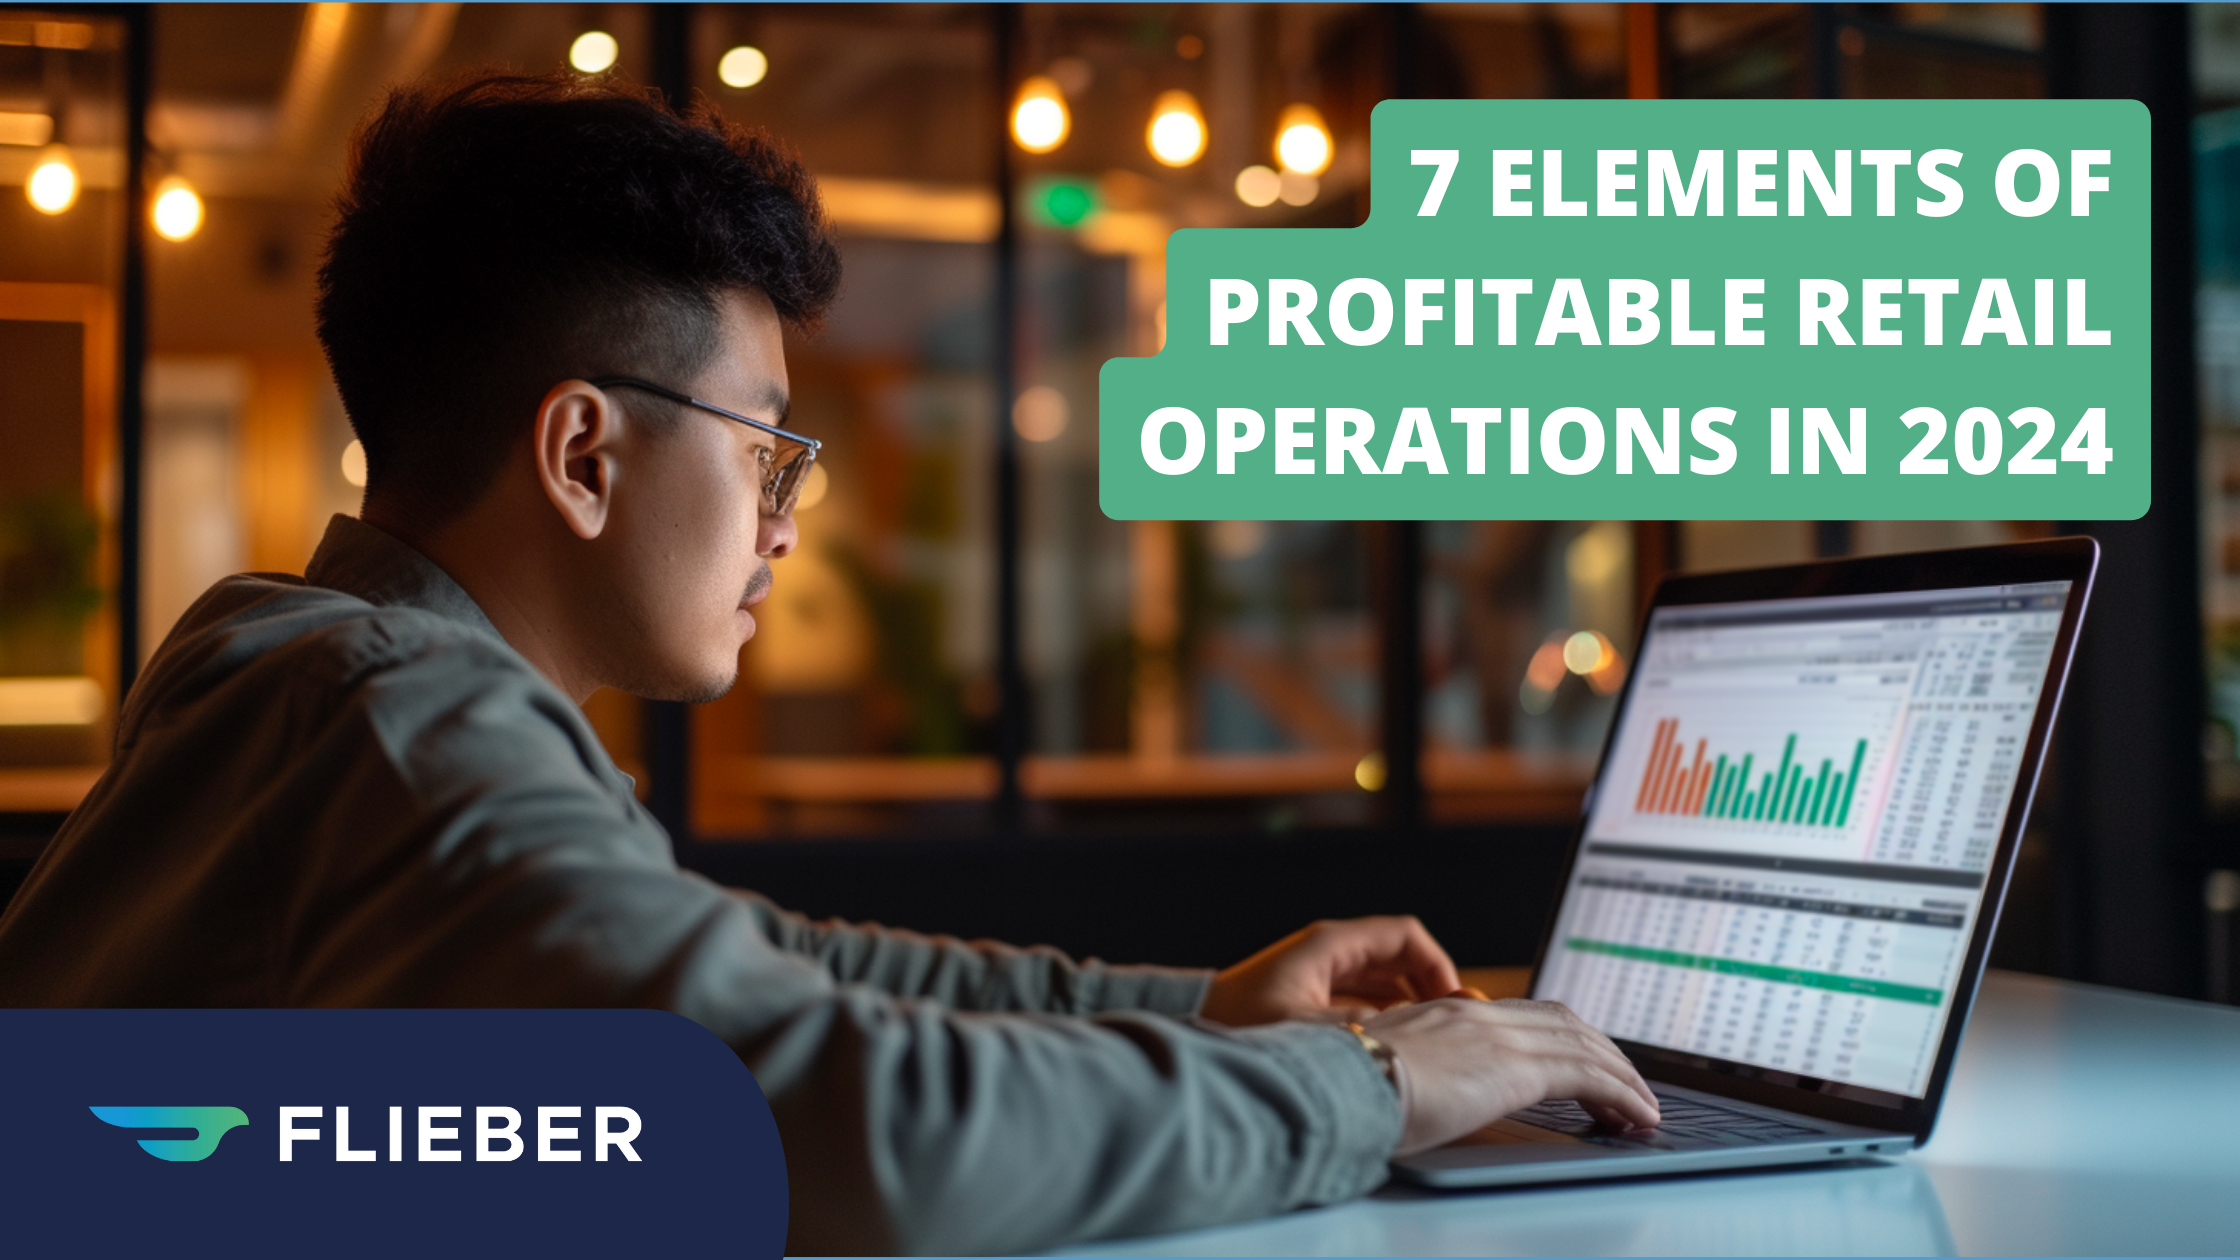 The 7 elements of profitable retail operations [2024]